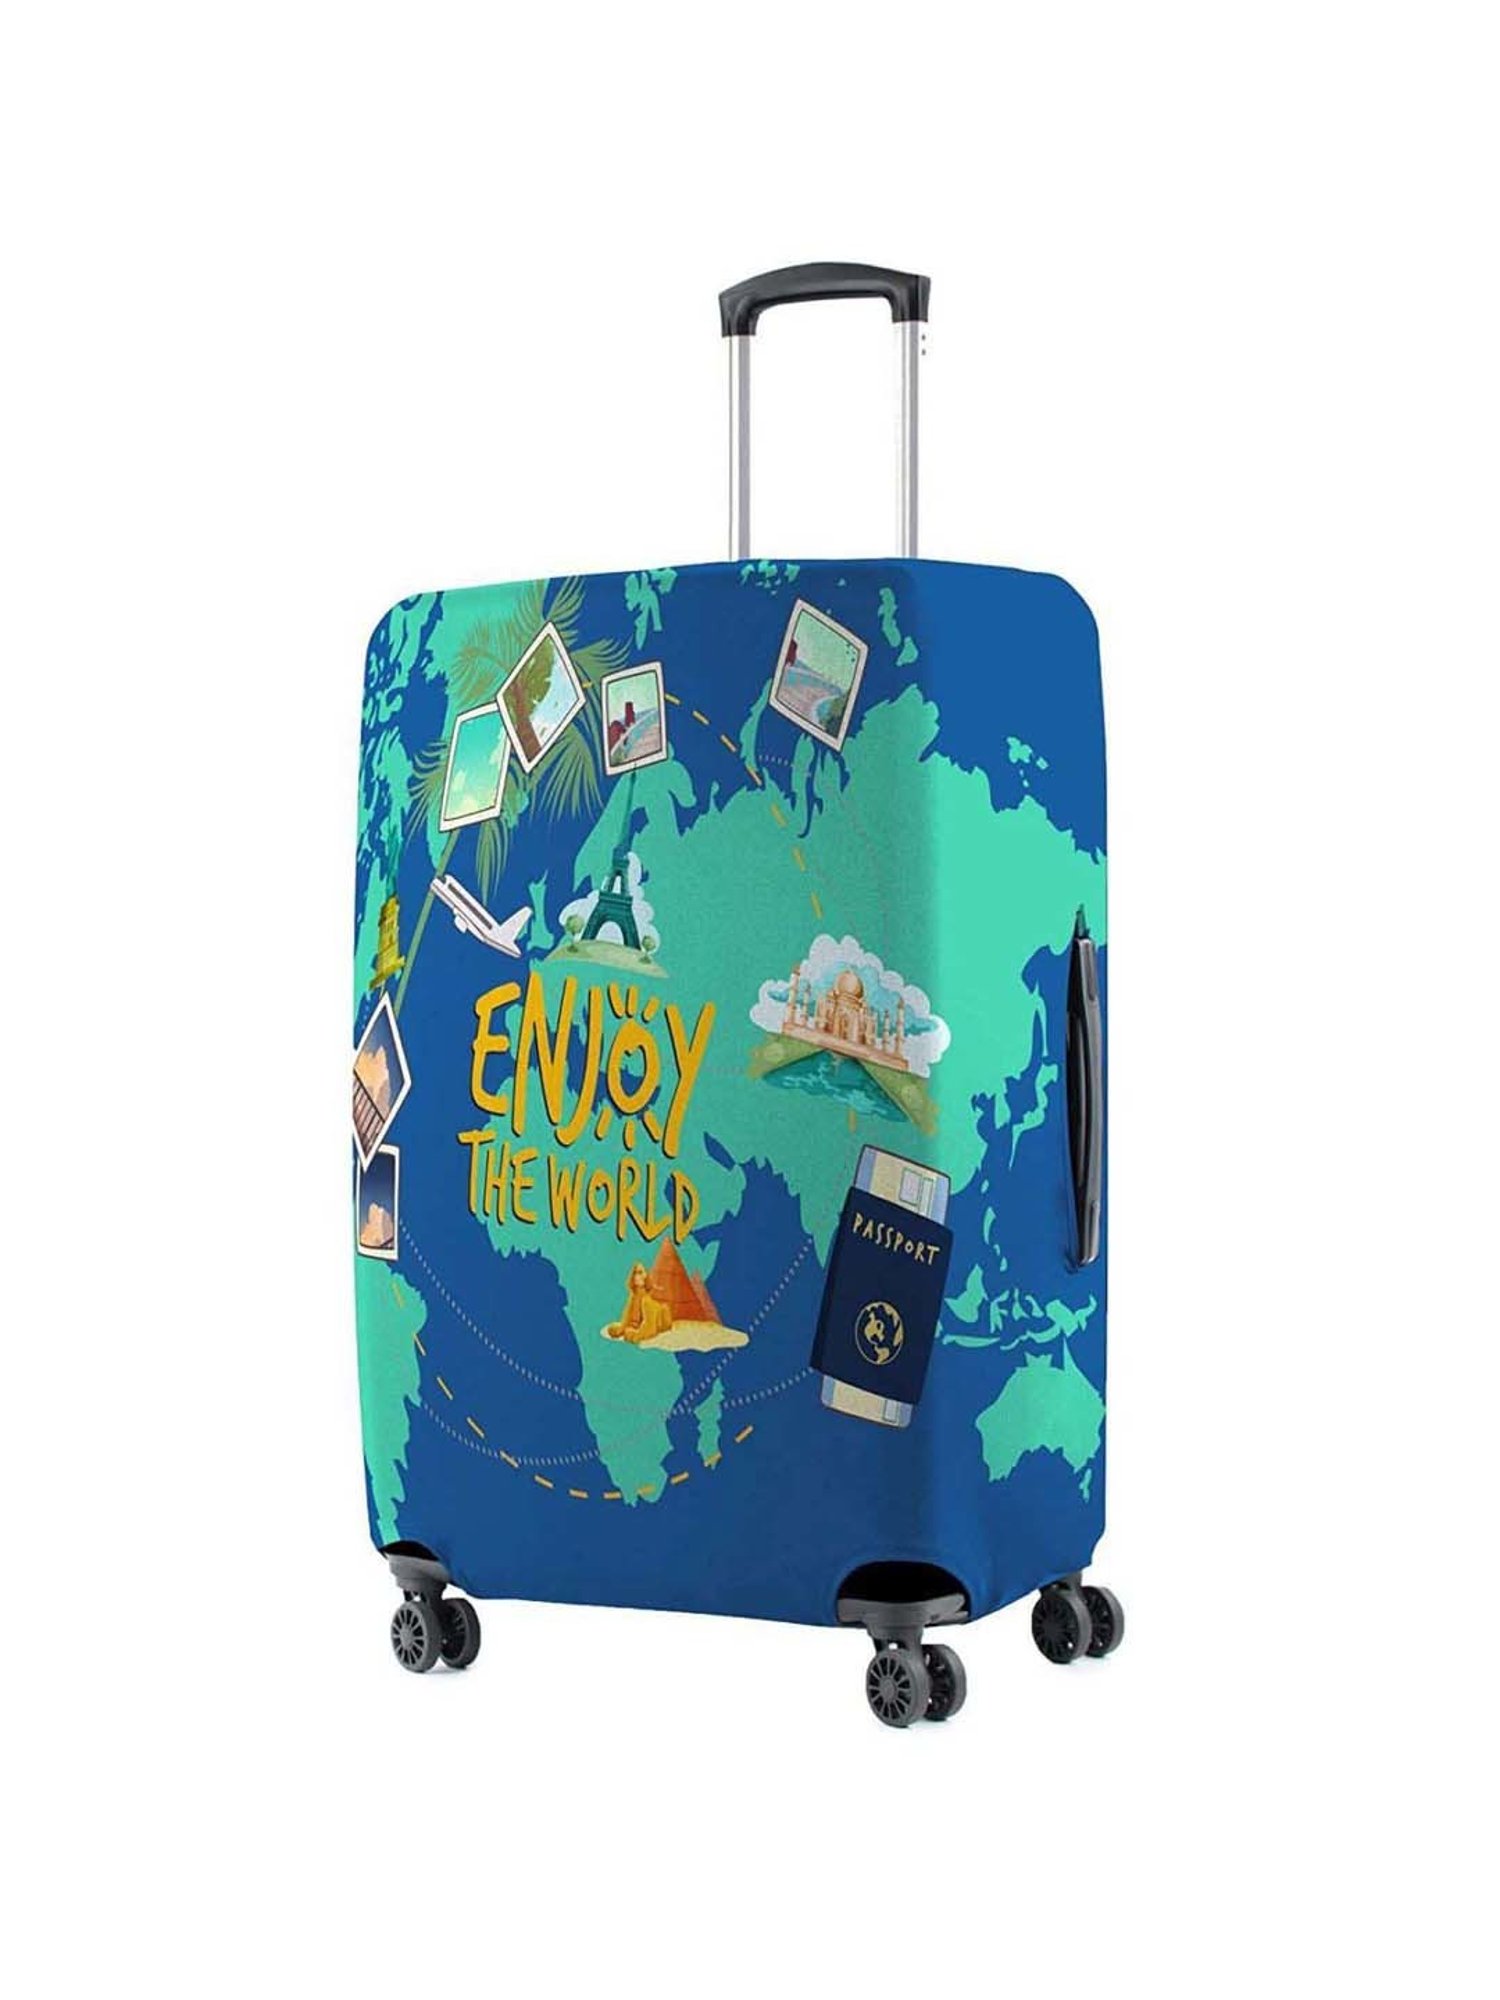 Luggage Trolley Bags: Easy and Convenient Travel | Luggage Trolley